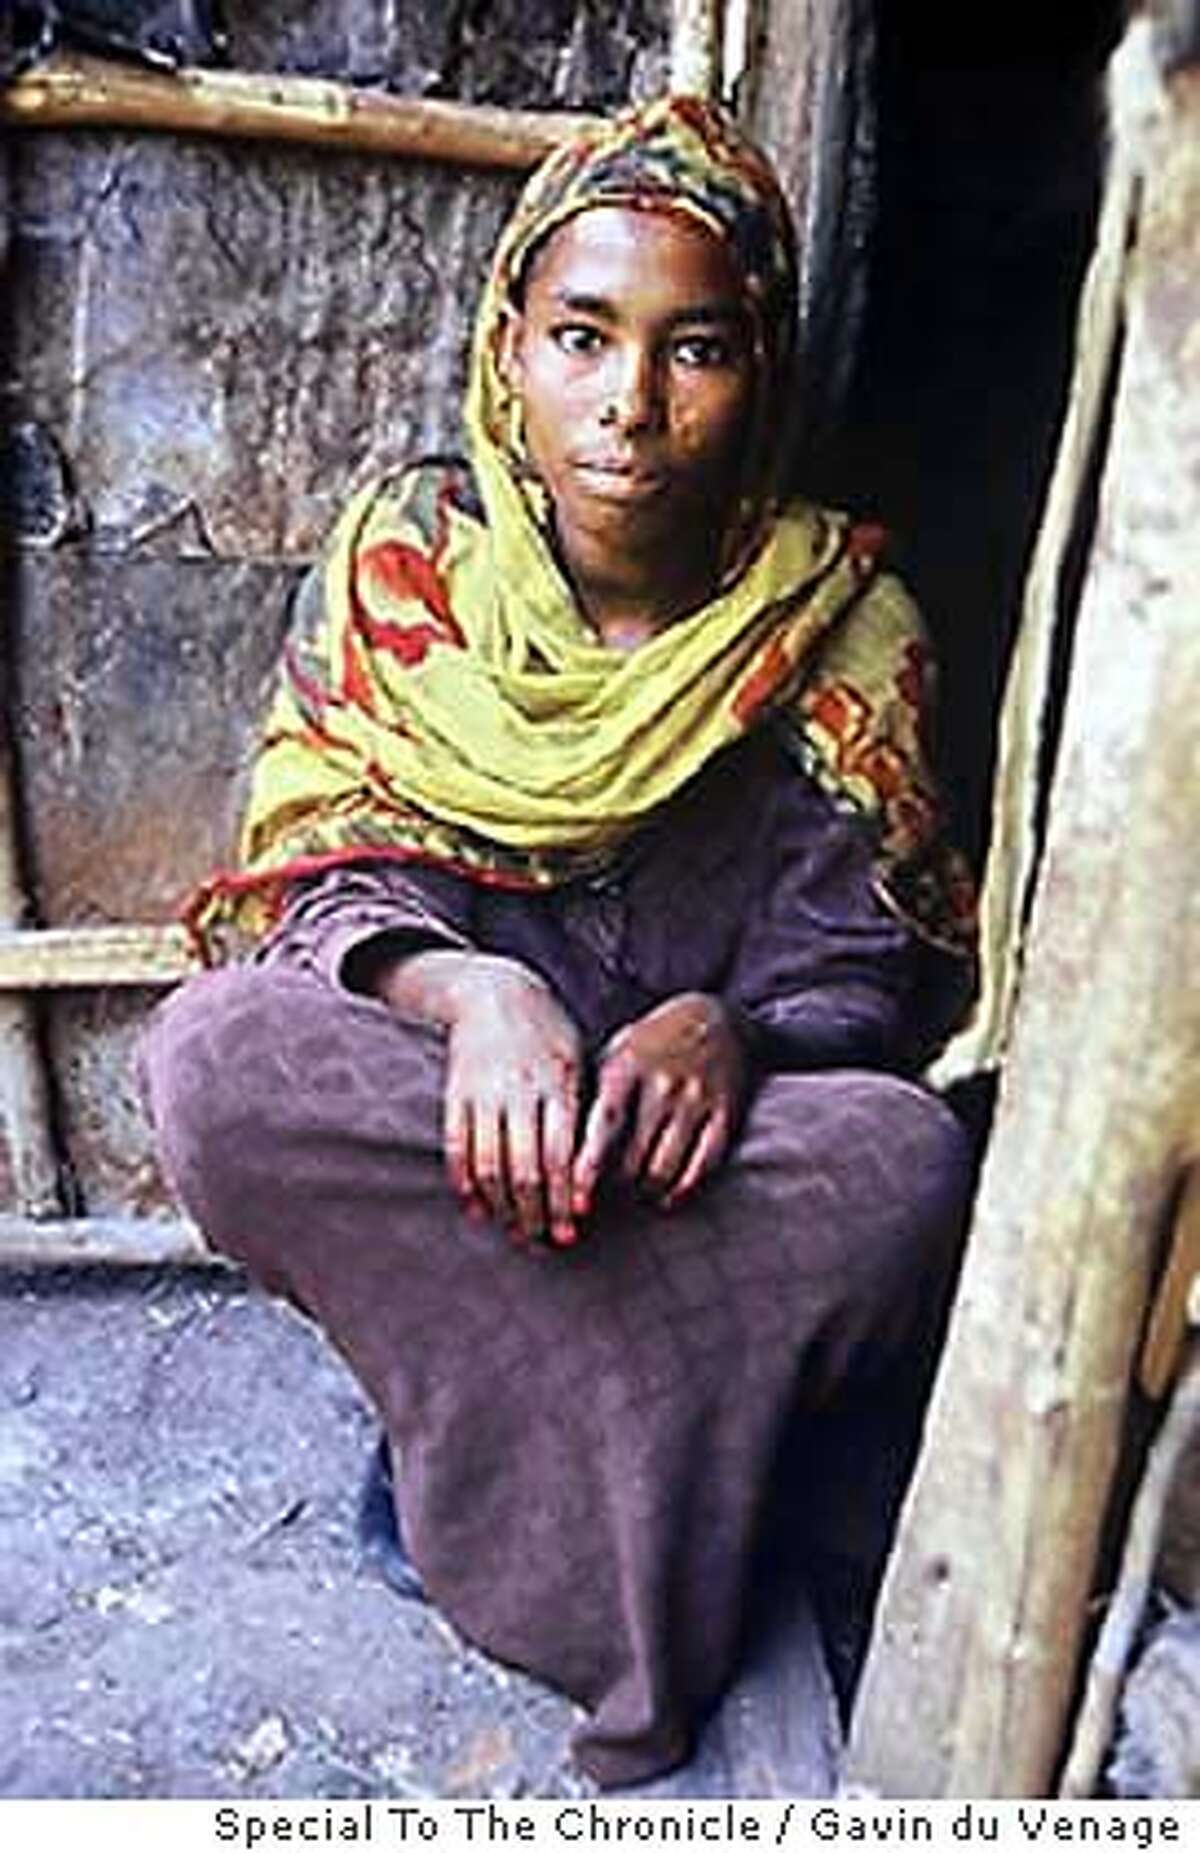 for ethiopia ; 22-year-old Zemu Tikulje a young woman from Abecha Village, 450 kilometres north of Addis Ababa, and the mother of four children. Young women like Tikulje can expect no� relief from childbirth year after year and abortion is often the only form of fertility control available to them. Gavin du Venage, / Special To The Chronicle / Gavin du Venage